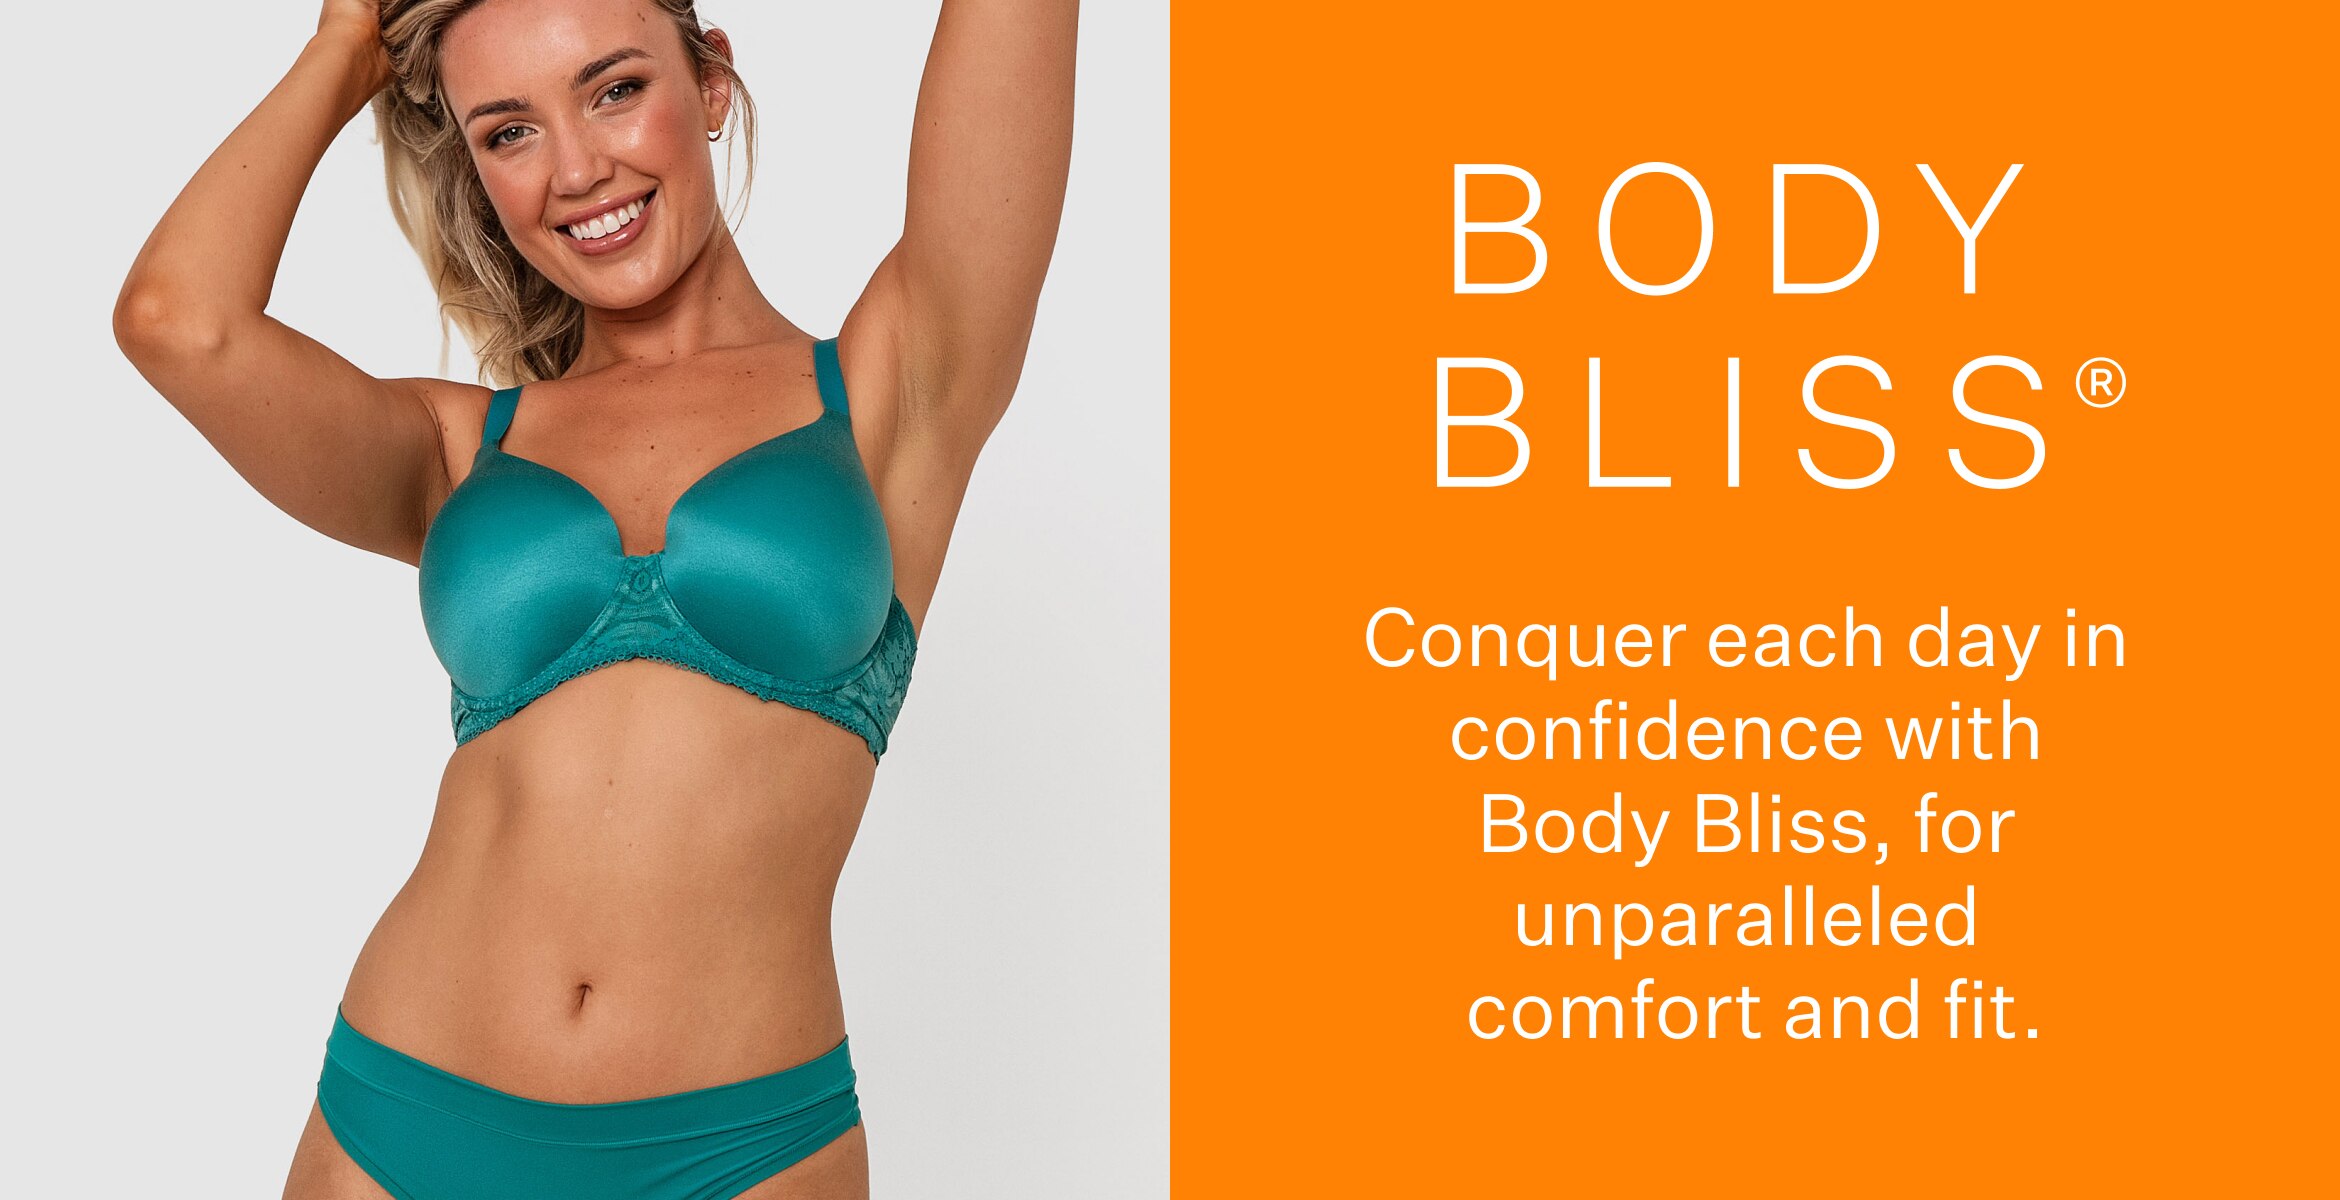 Body Bliss. Conquer each day in confidence with Body Bliss, for unparalleled comfort and fit.